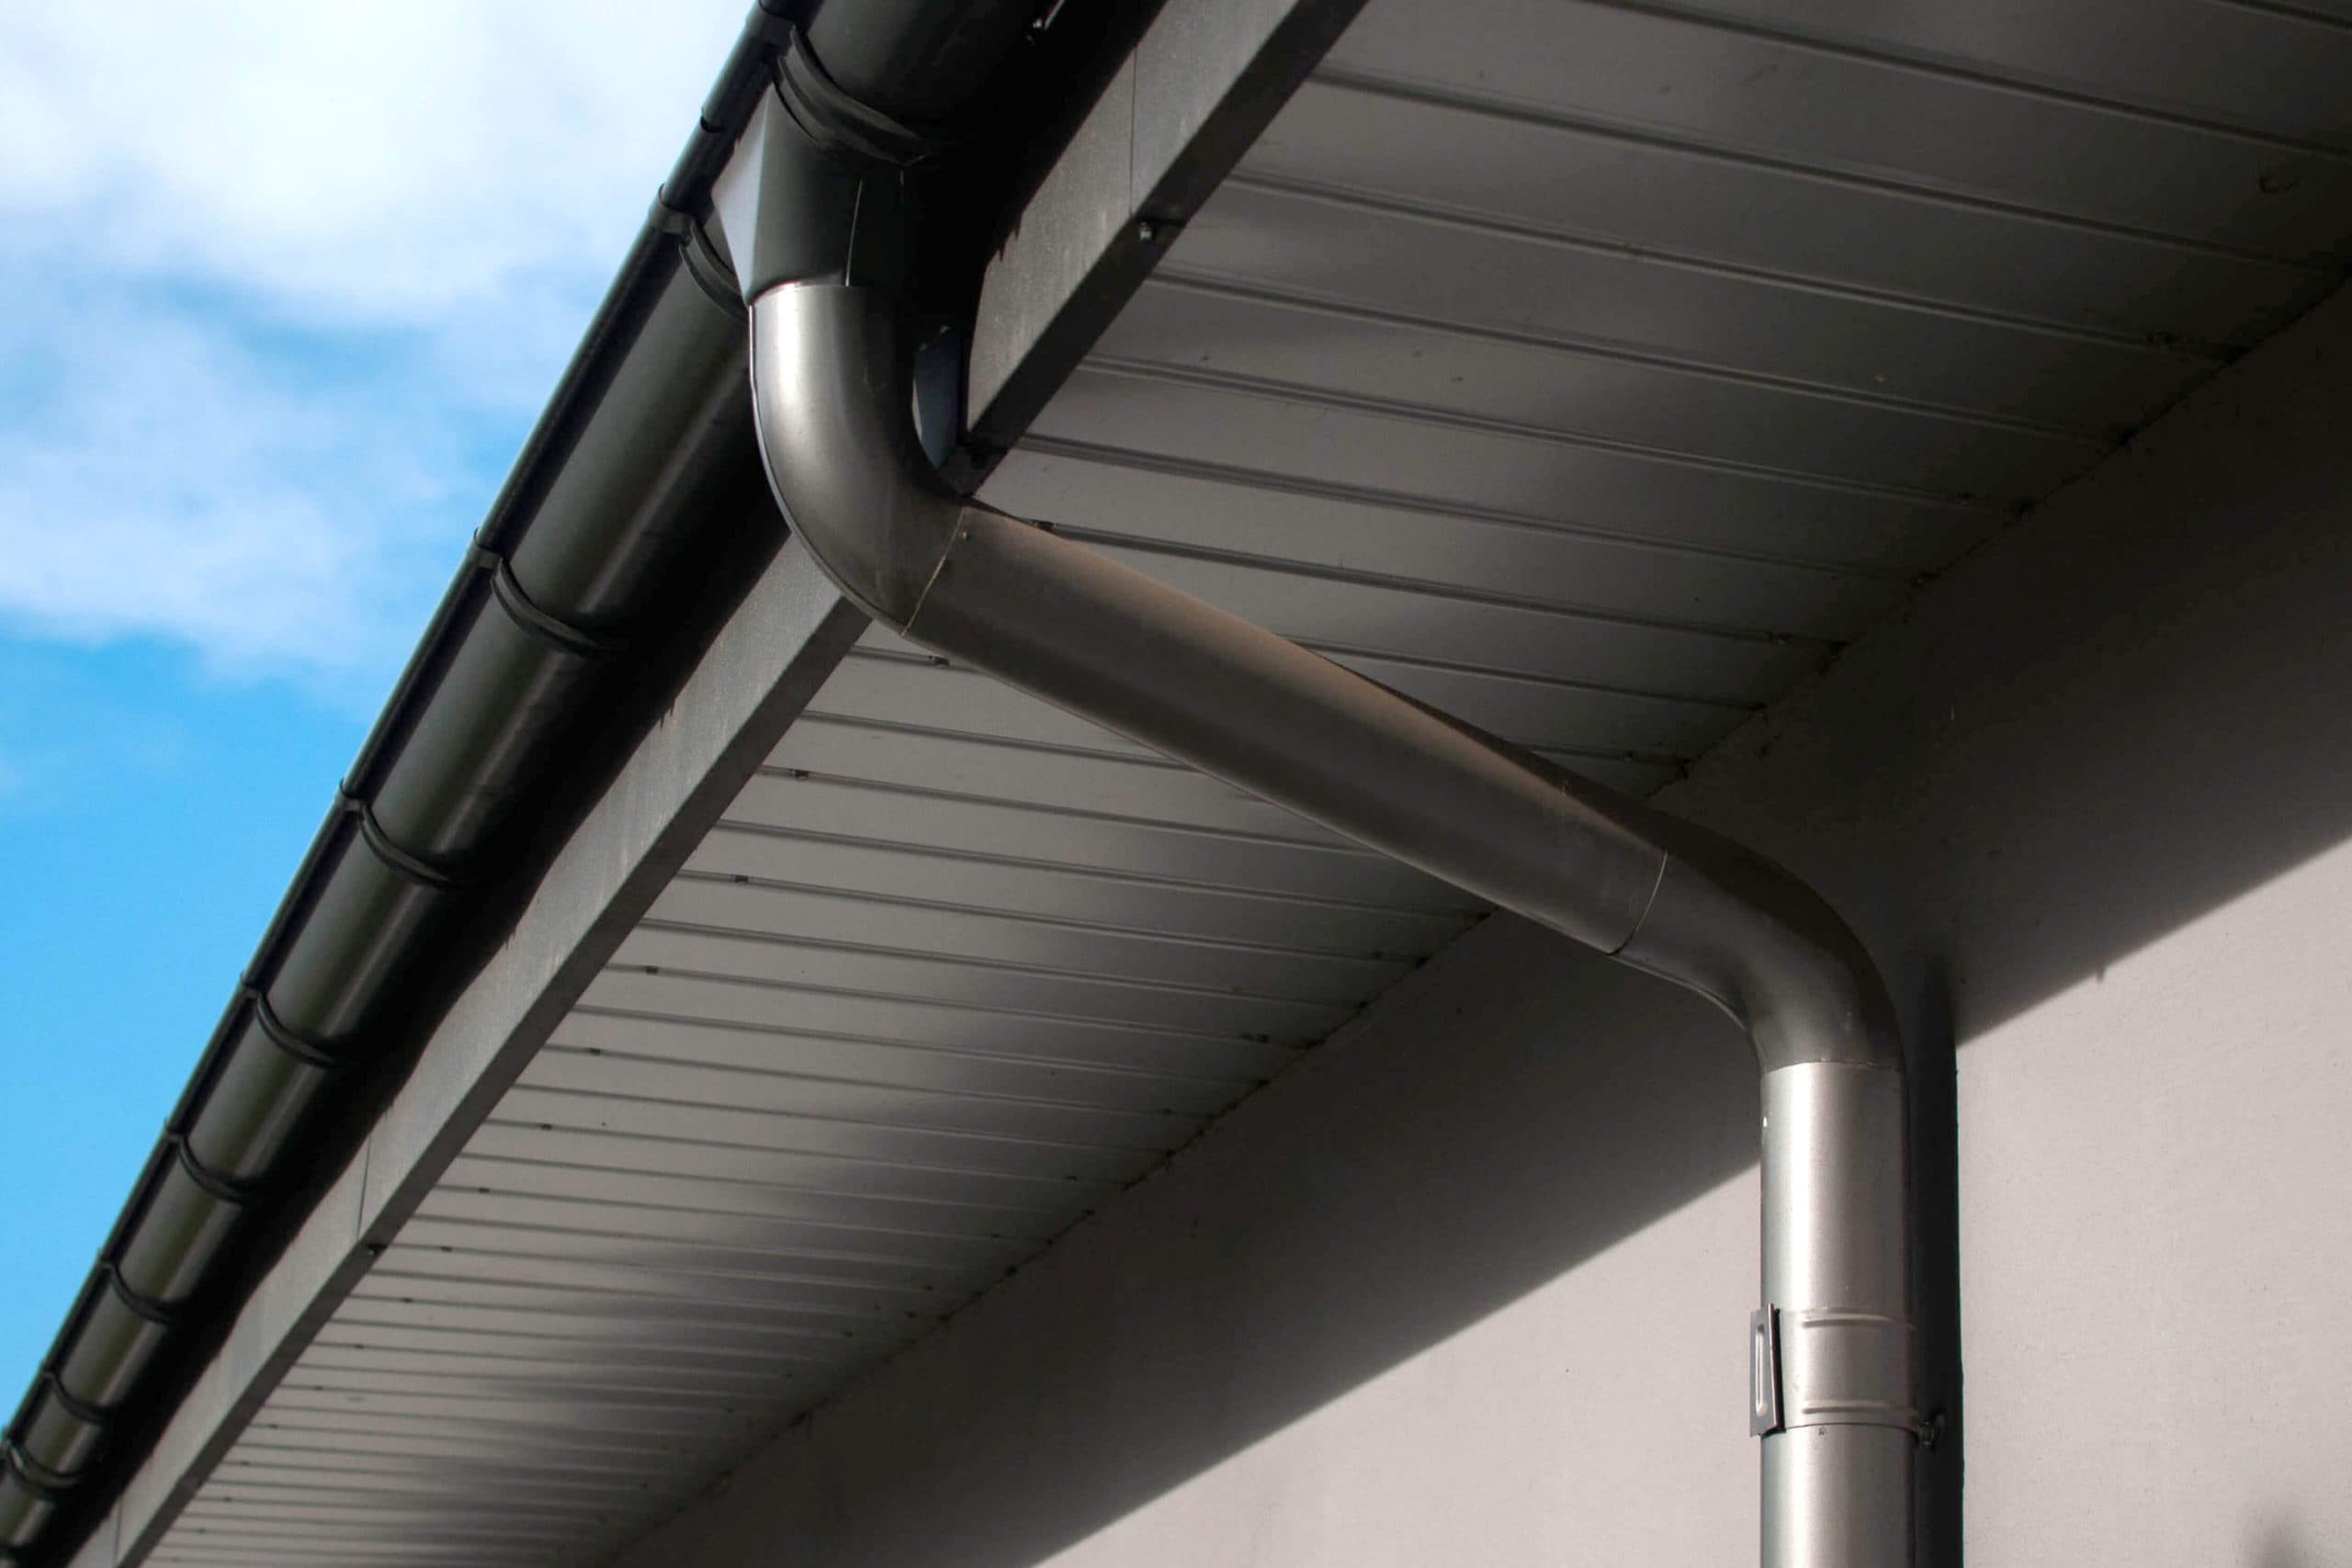 Reliable and affordable Galvanized gutters installation in Asheville